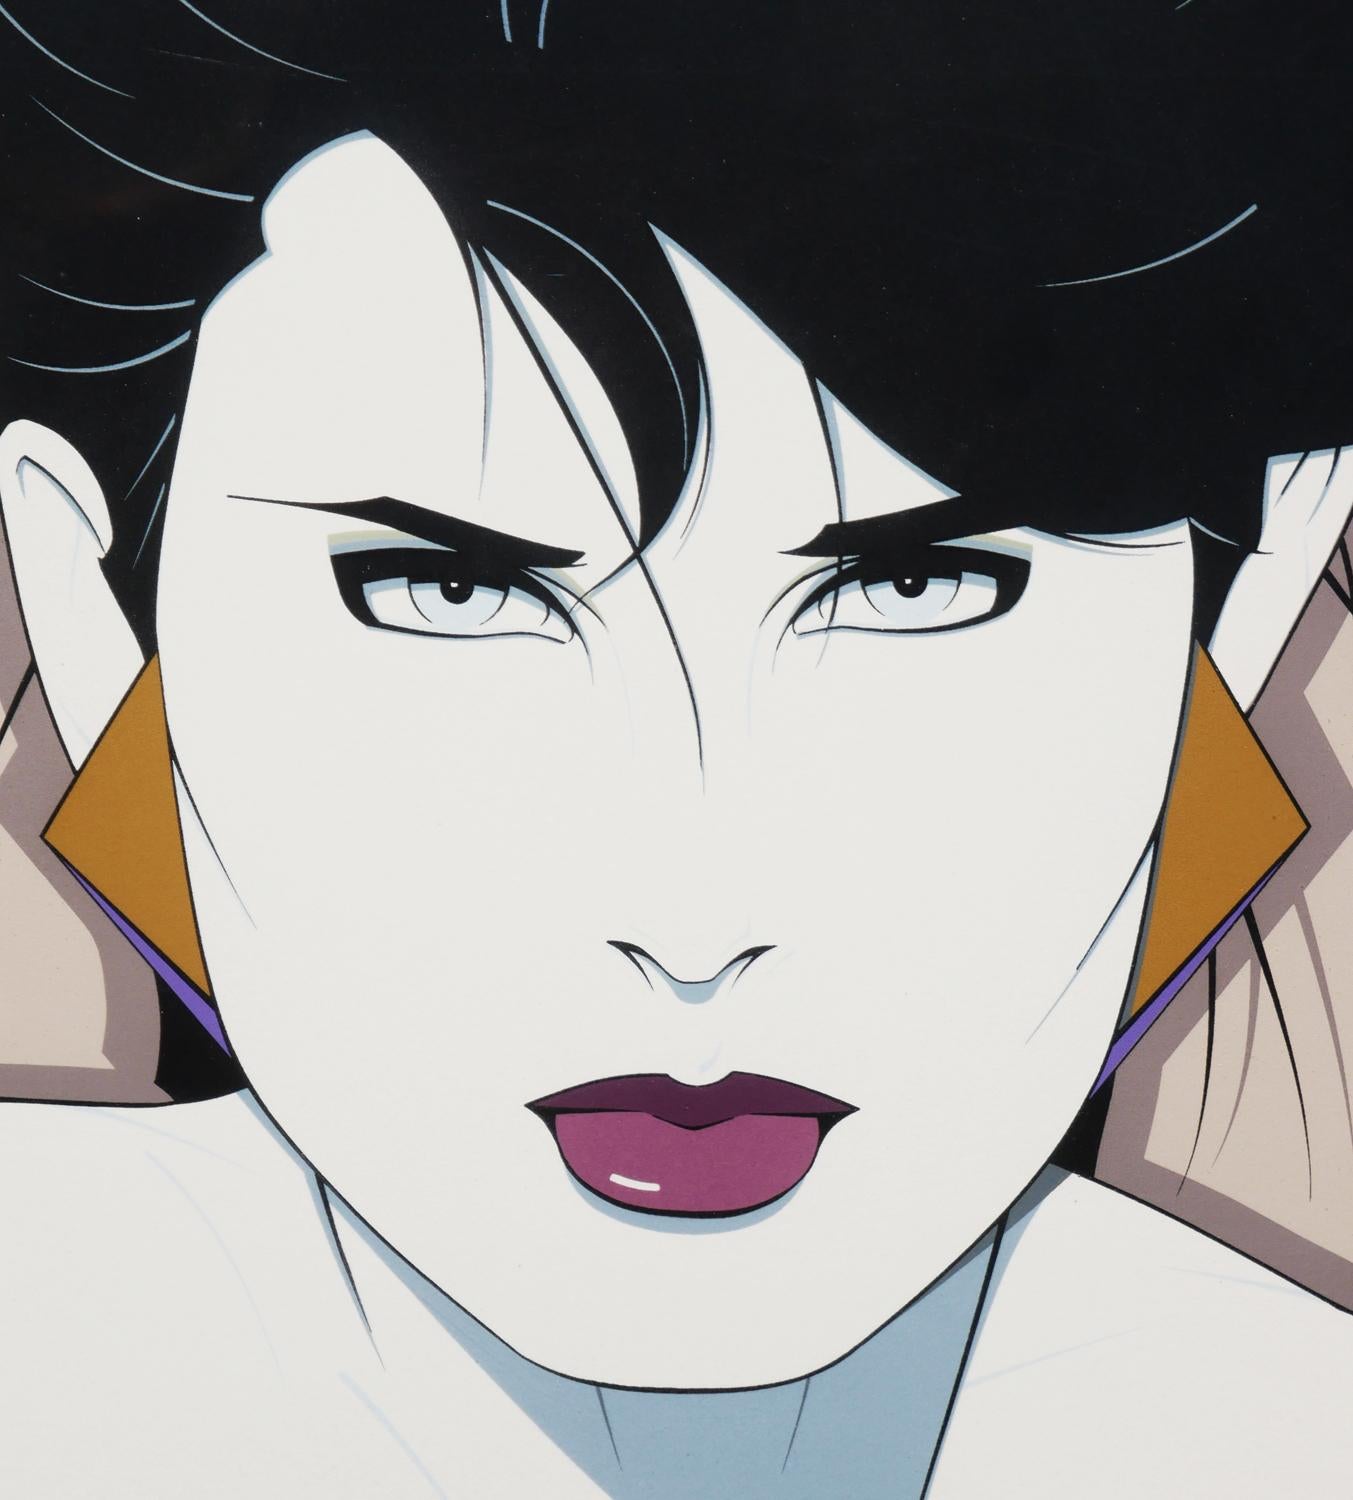 From the Catalogue: Rendered with an economy of line and flat, cool planes of color, Patrick Nagel’s Kristen presents a piercing portrait that distills the artist’s iconic aesthetic with which he garnered widespread popularity in the 1980s. Nagel,